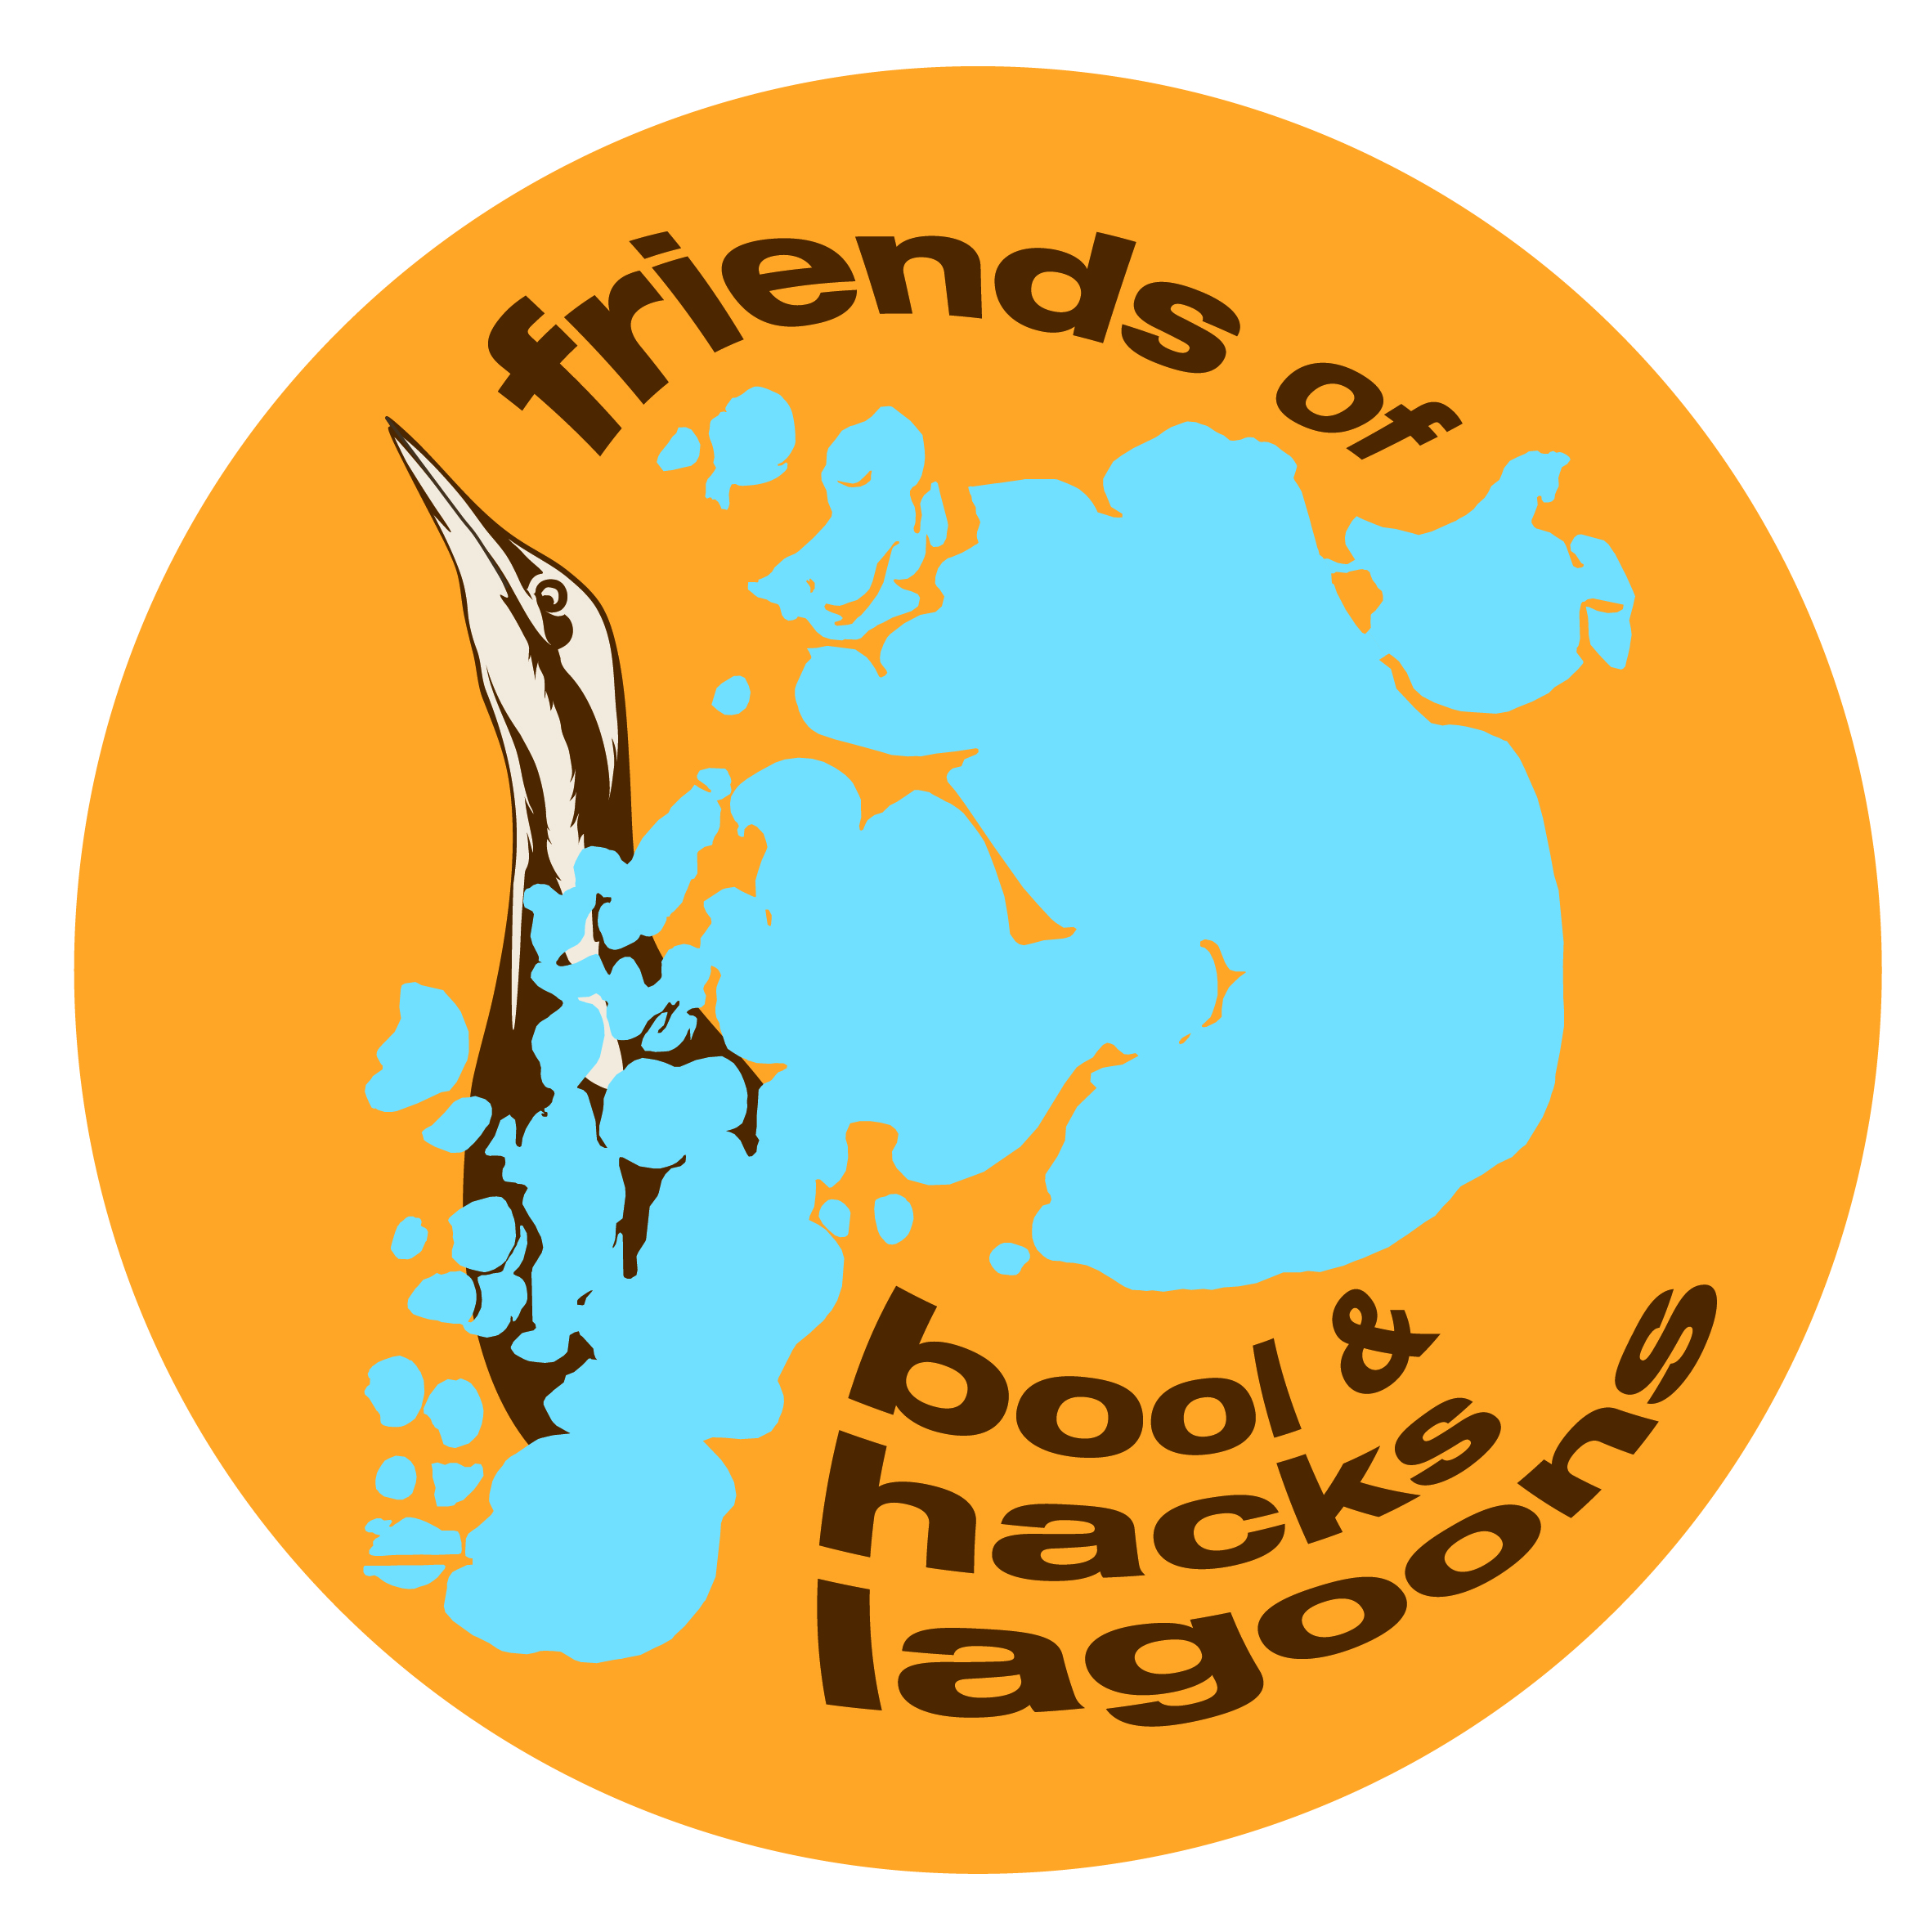 friends-of-bool-and-hacks-lagoons